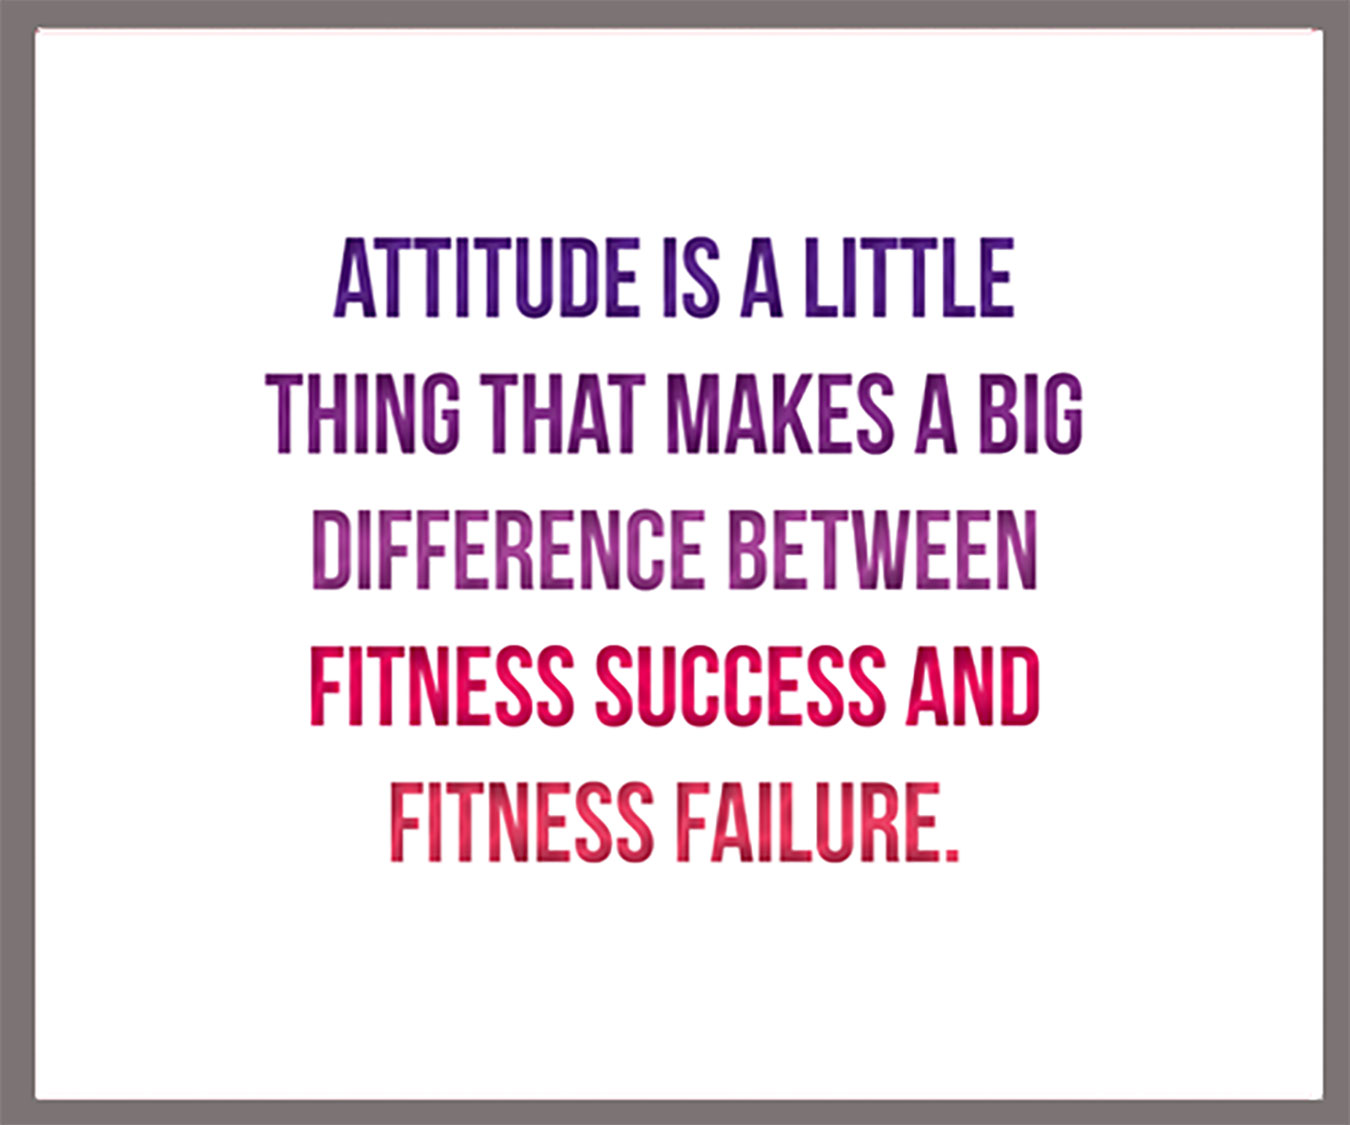 A Big Difference - Living Fit Lifestyle